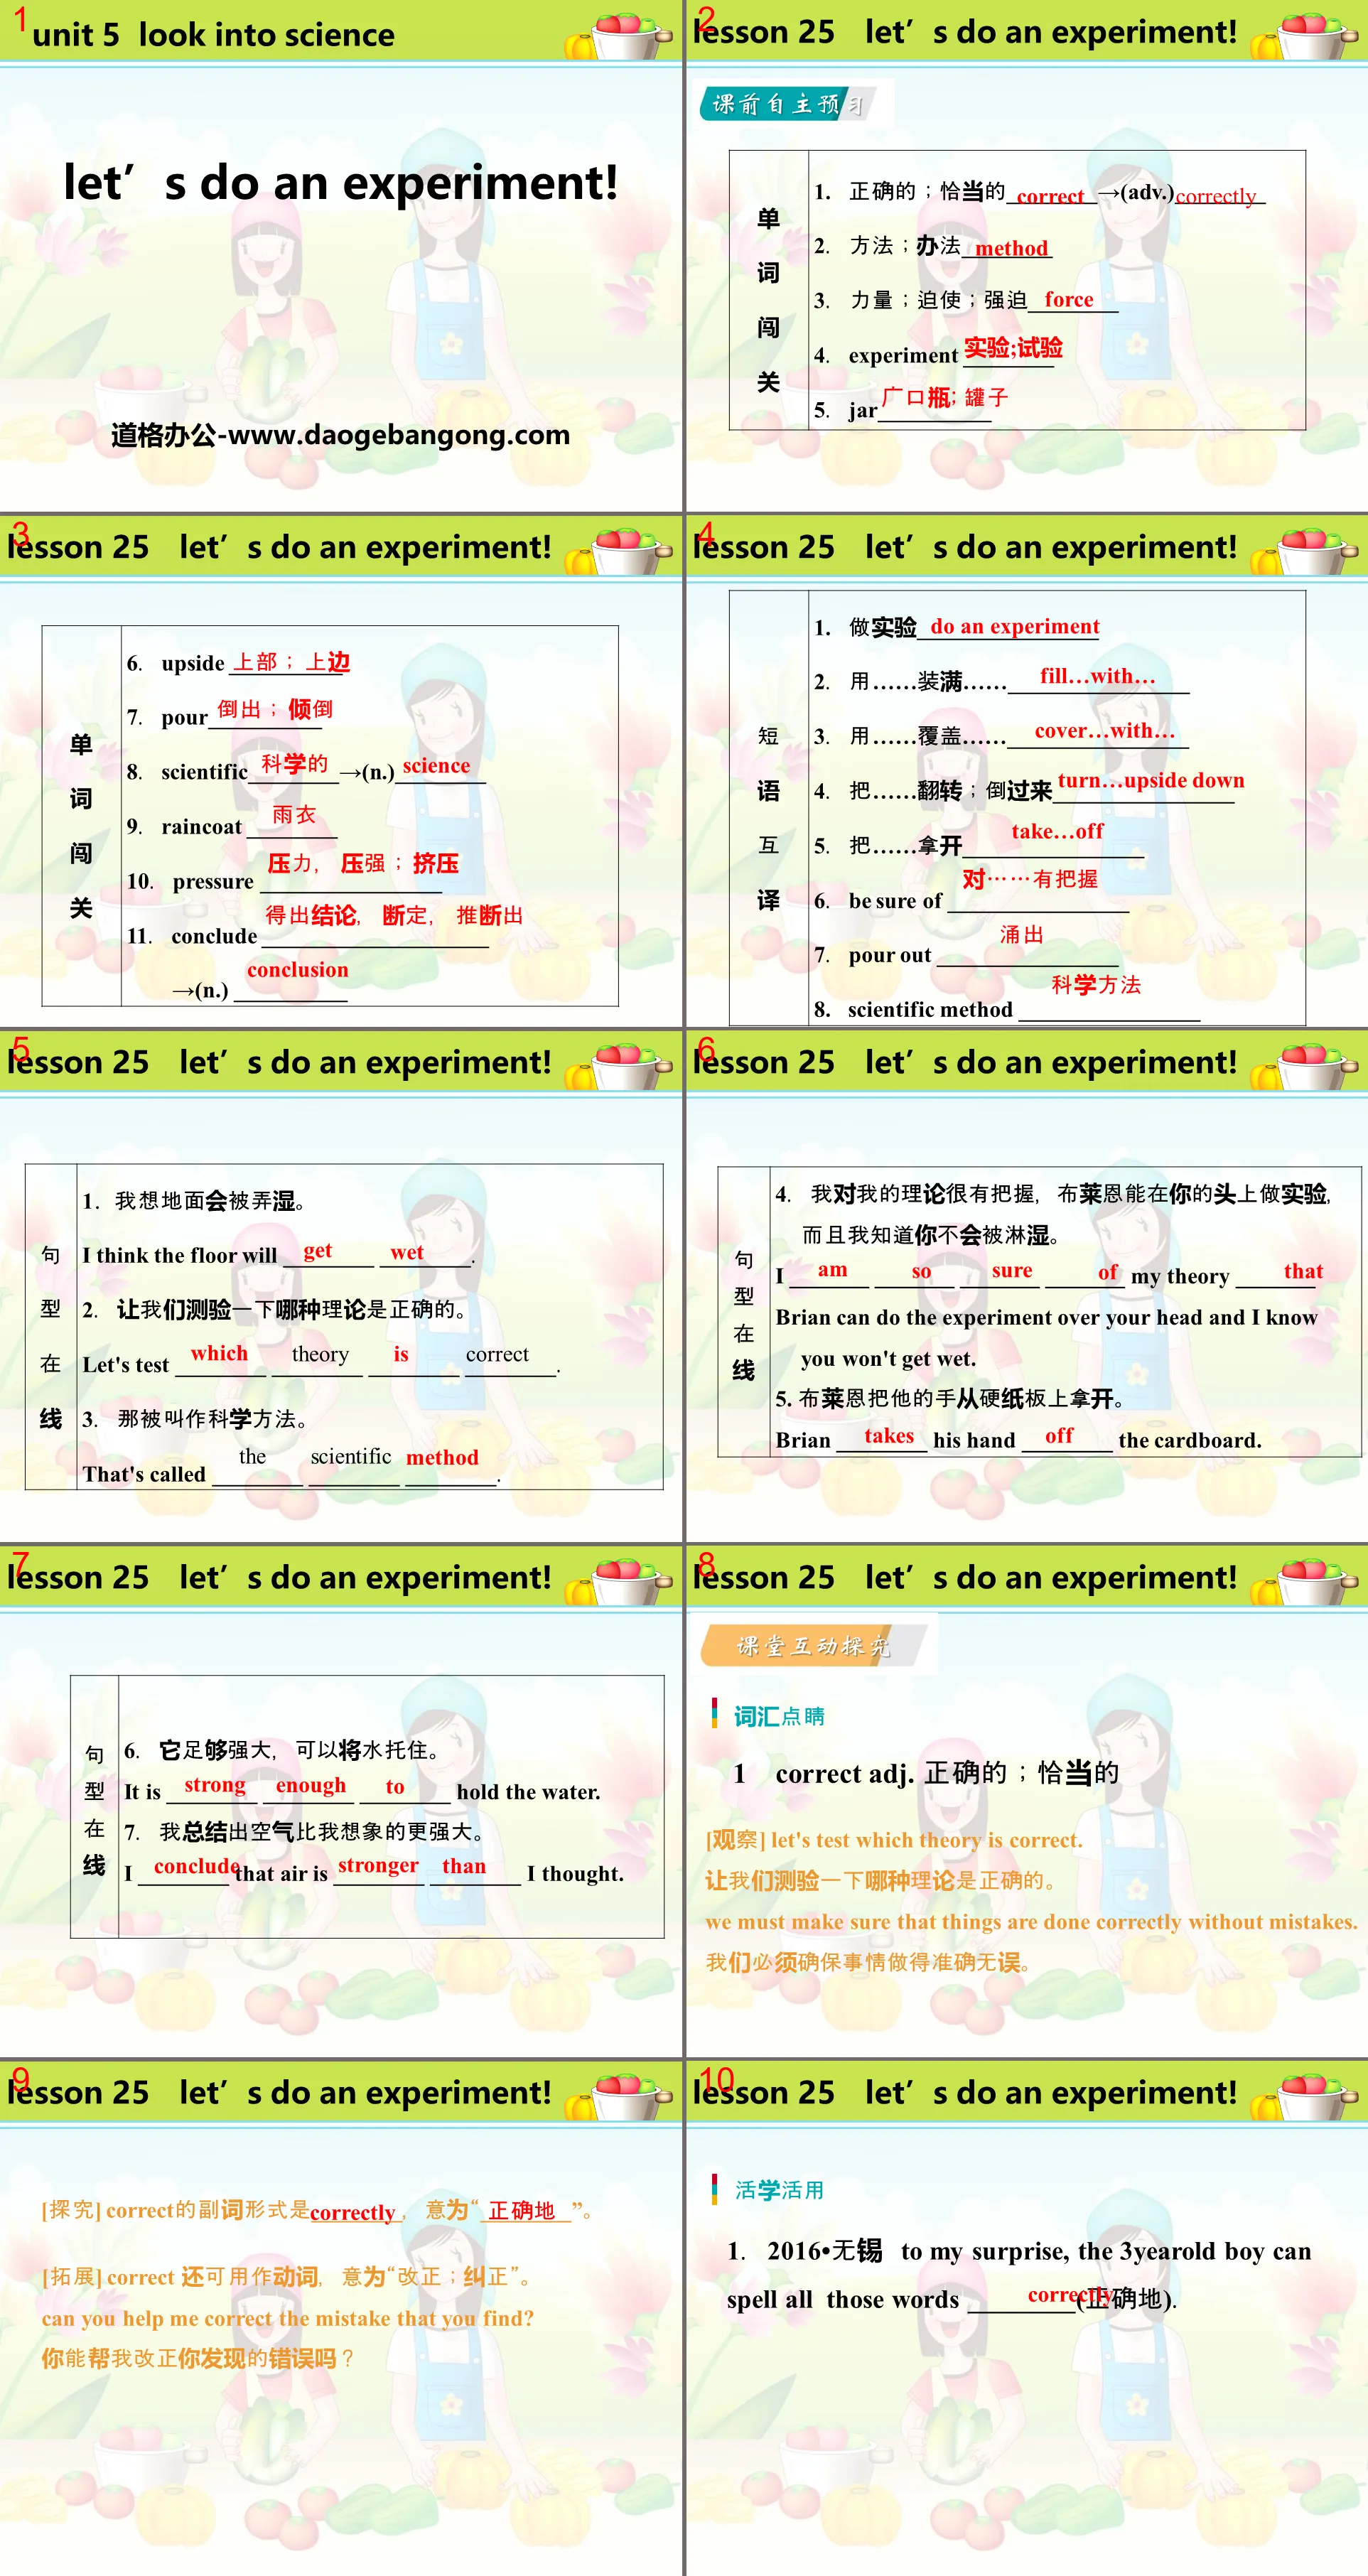 《Let's Do an Experiment》Look into Science! PPT教学课件
